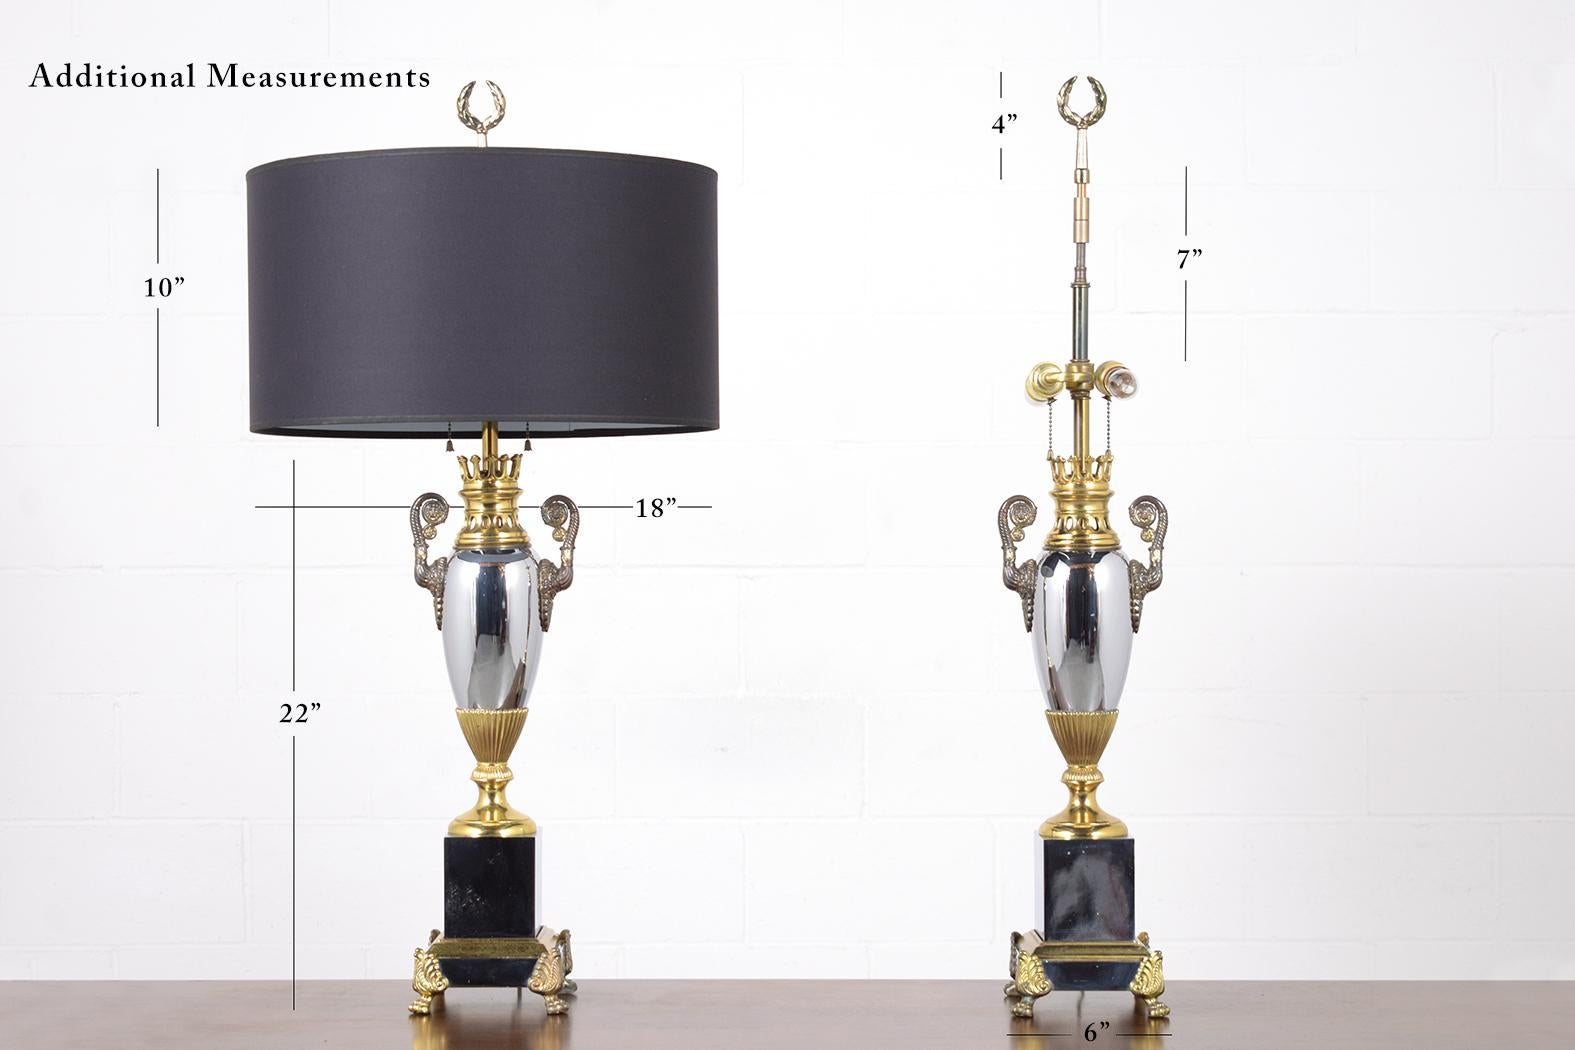 Hollywood Regency 1950s Vintage Regency Style Table Lamps: Silver & Gold Finish with Black Shades For Sale